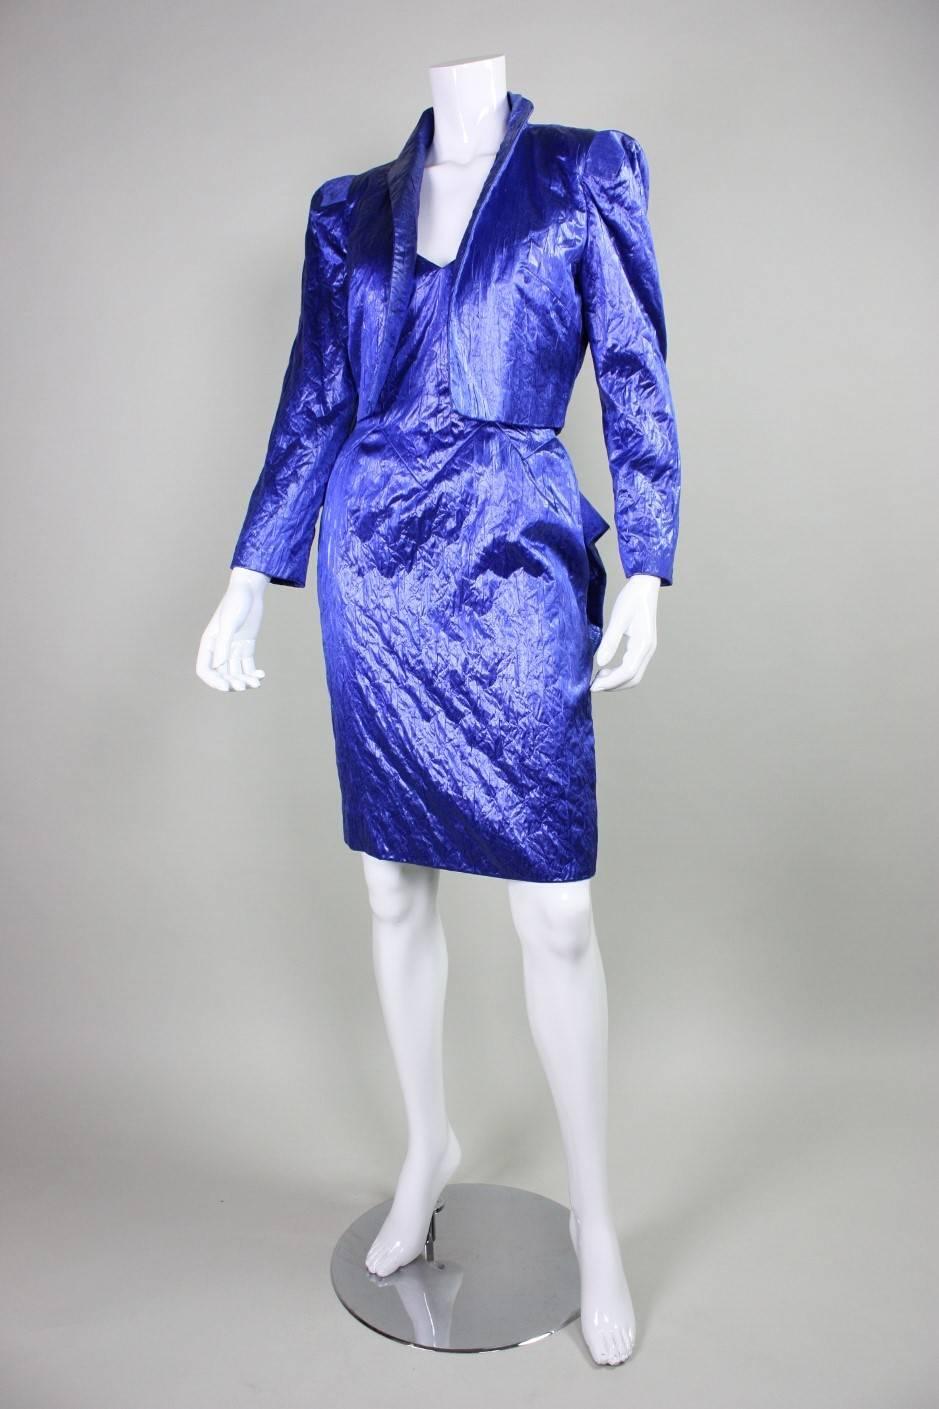 Vintage cocktail dress and jacket from Loris Azzaro is made of textured blue fabric and dates to the 1980's.  The dress has a jagged geometric neckline that is echoed in the waistline of the skirt.  Origami-like folding on the backside of the dress